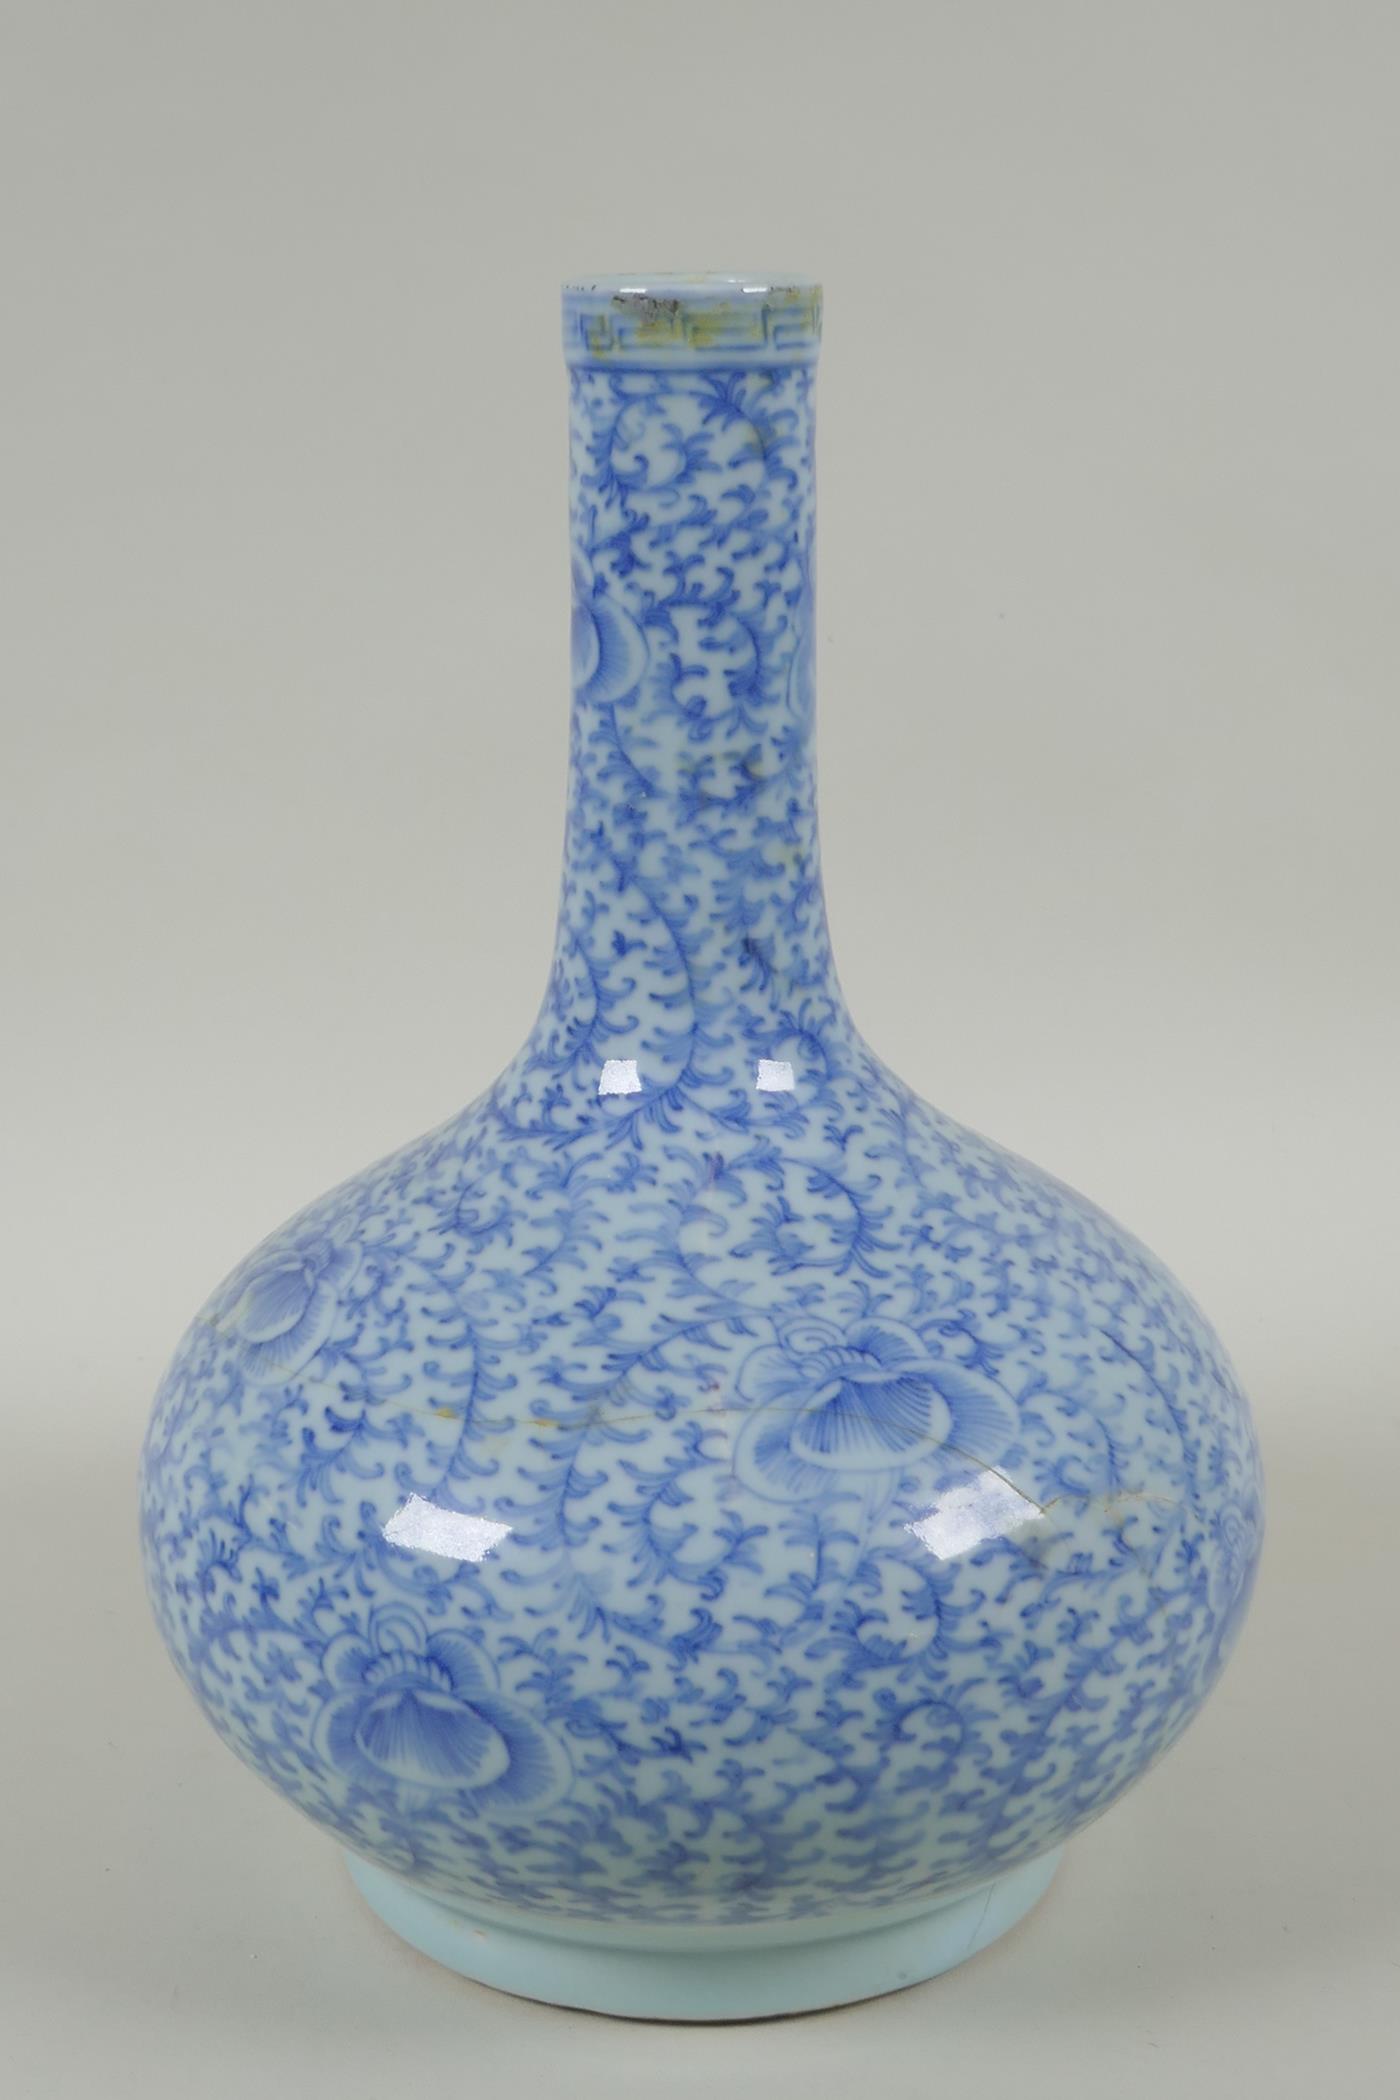 A C19th Chinese blue and white porcelain bottle vase with scrolling floral decoration, AF repair, - Image 3 of 6